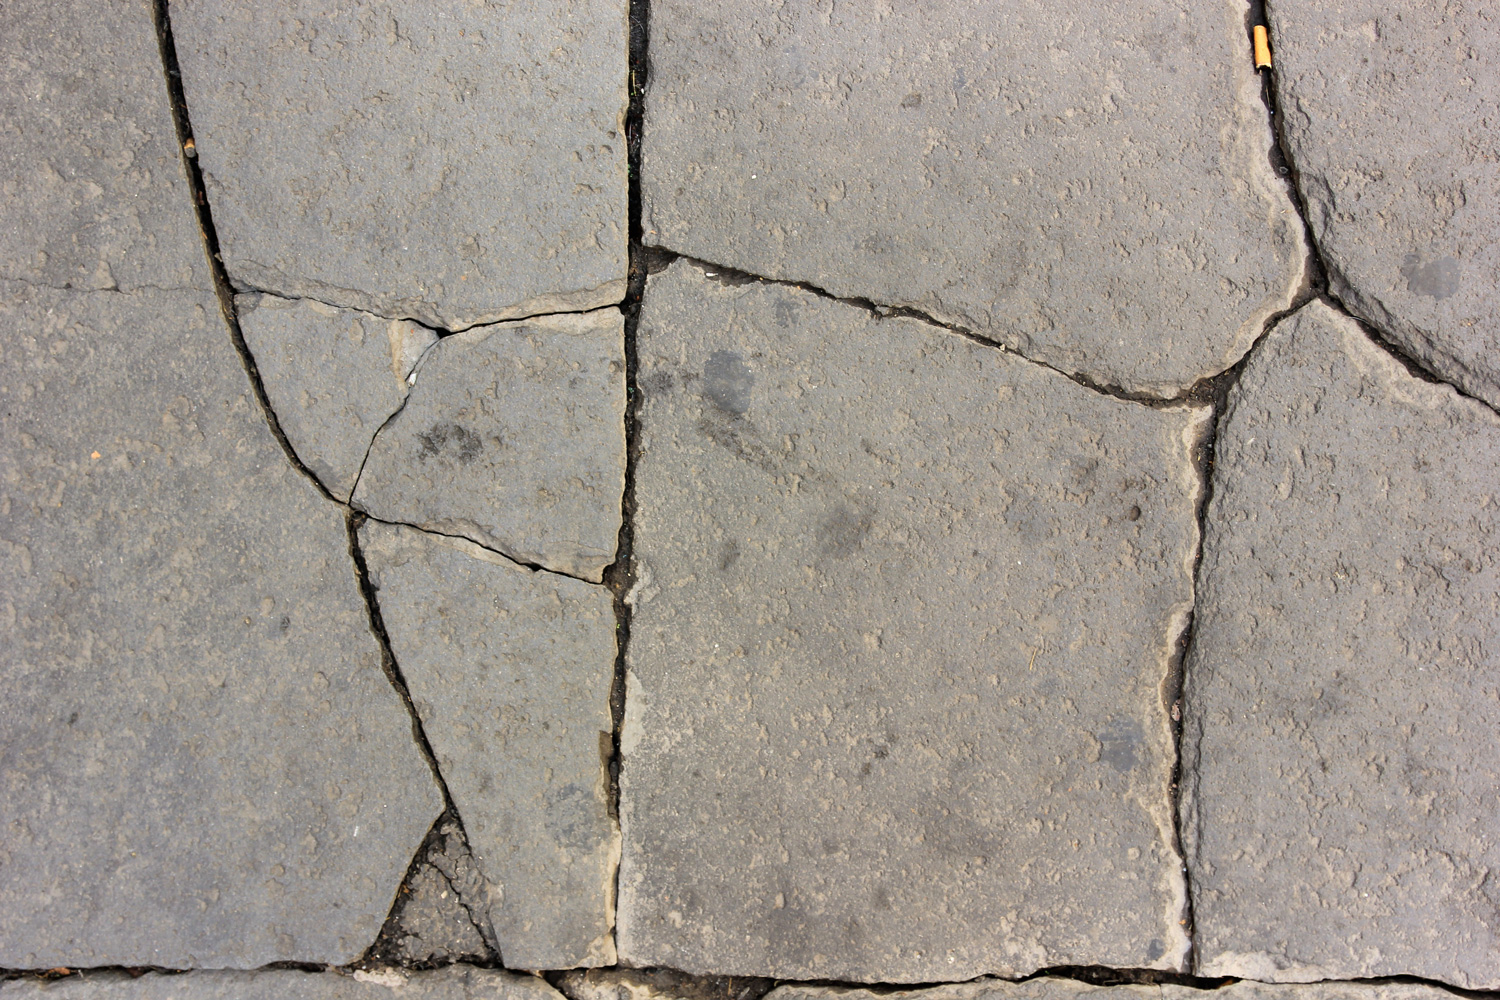 Cracked Paving Stones Texture for Backgrounds